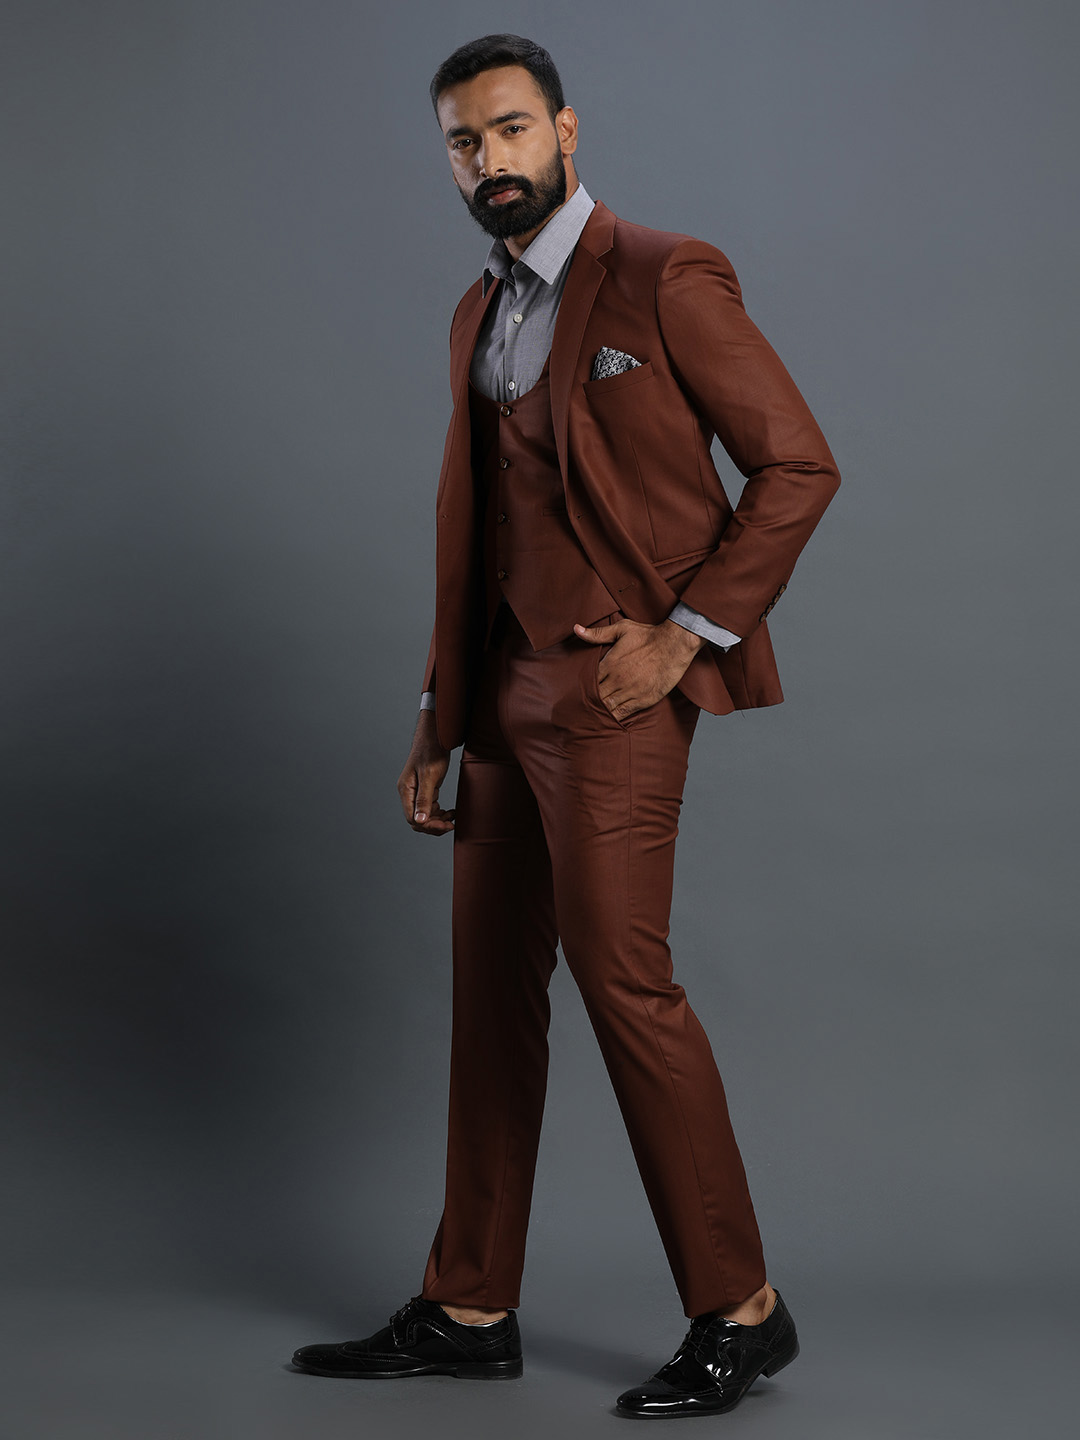 Rent/Buy Brown 3 Piece Suit Home Trial Free Delivery